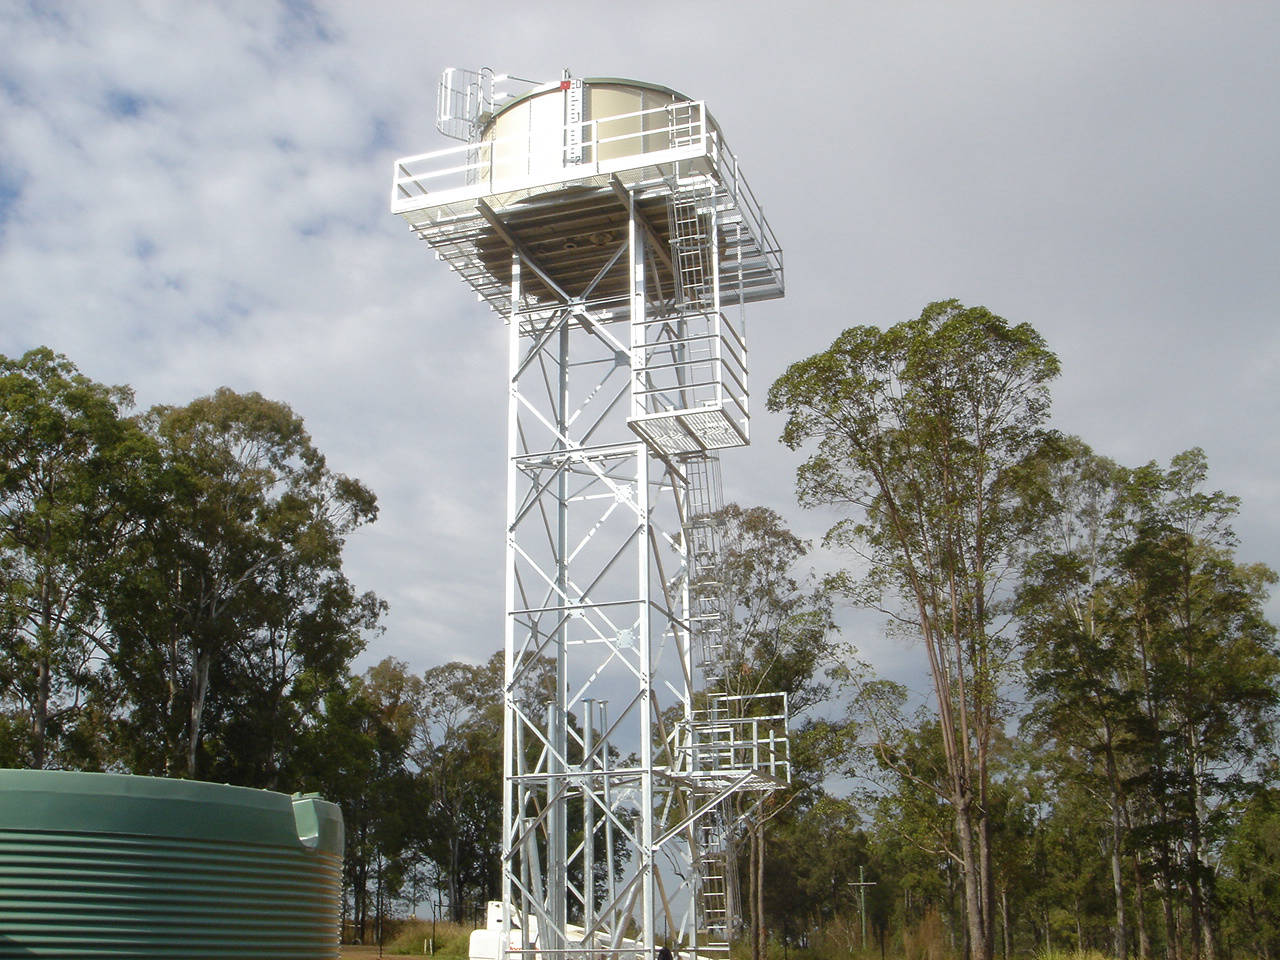 Southern Cross GY Tank Stand, Community Water Supply